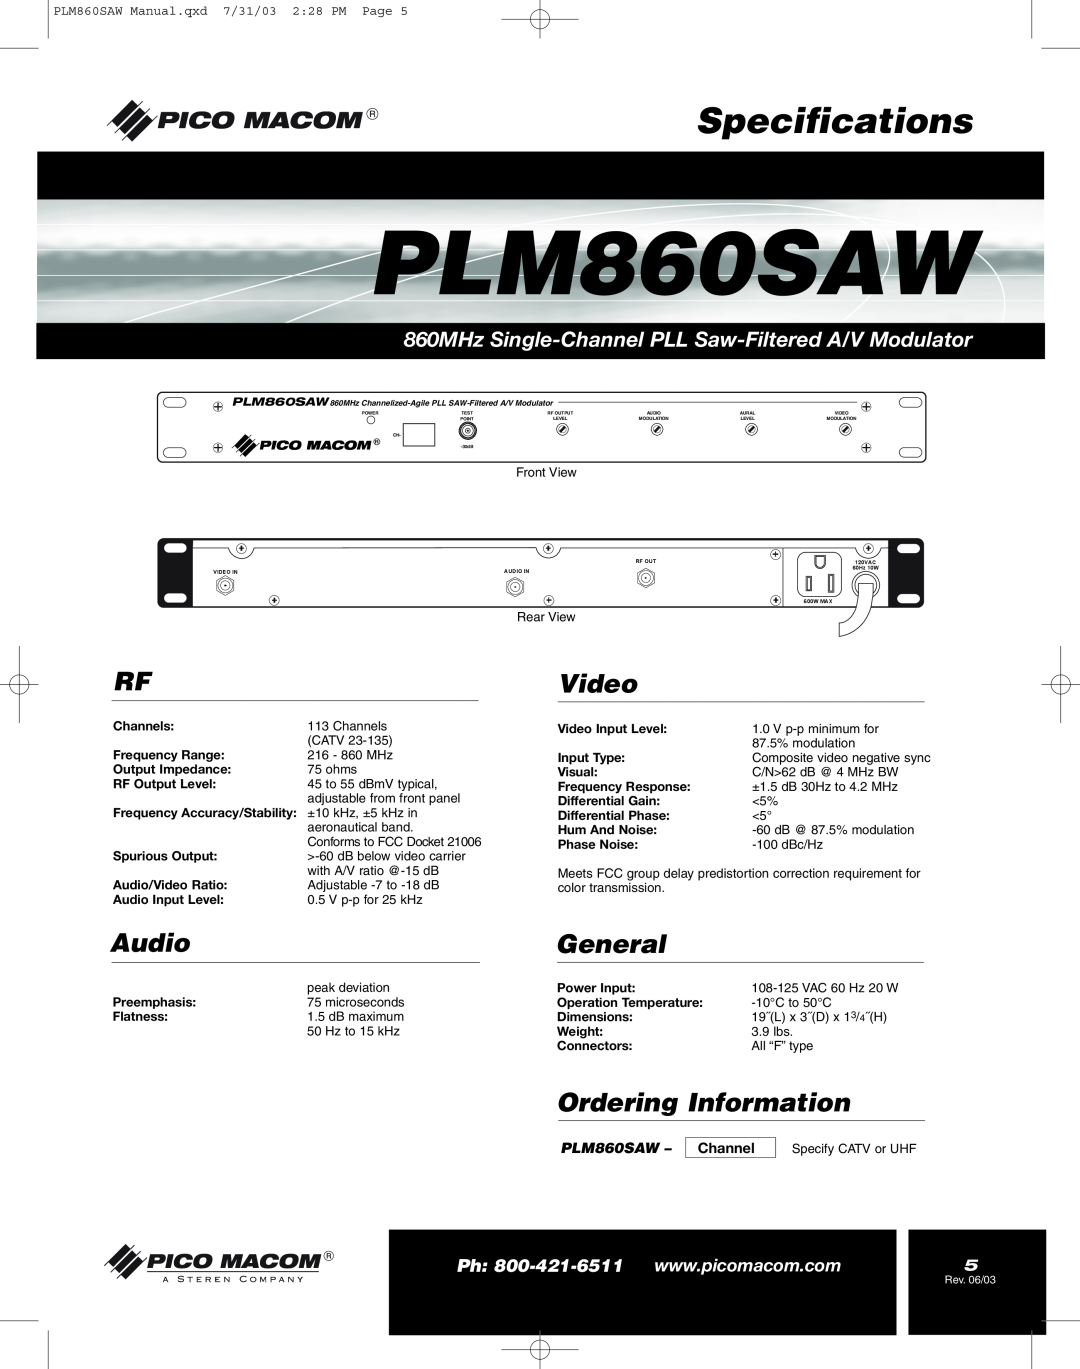 Pico Macom PFAM860SAW operation manual Specifications, Audio, Video, General, Ordering Information, PLM860SAW - Channel 